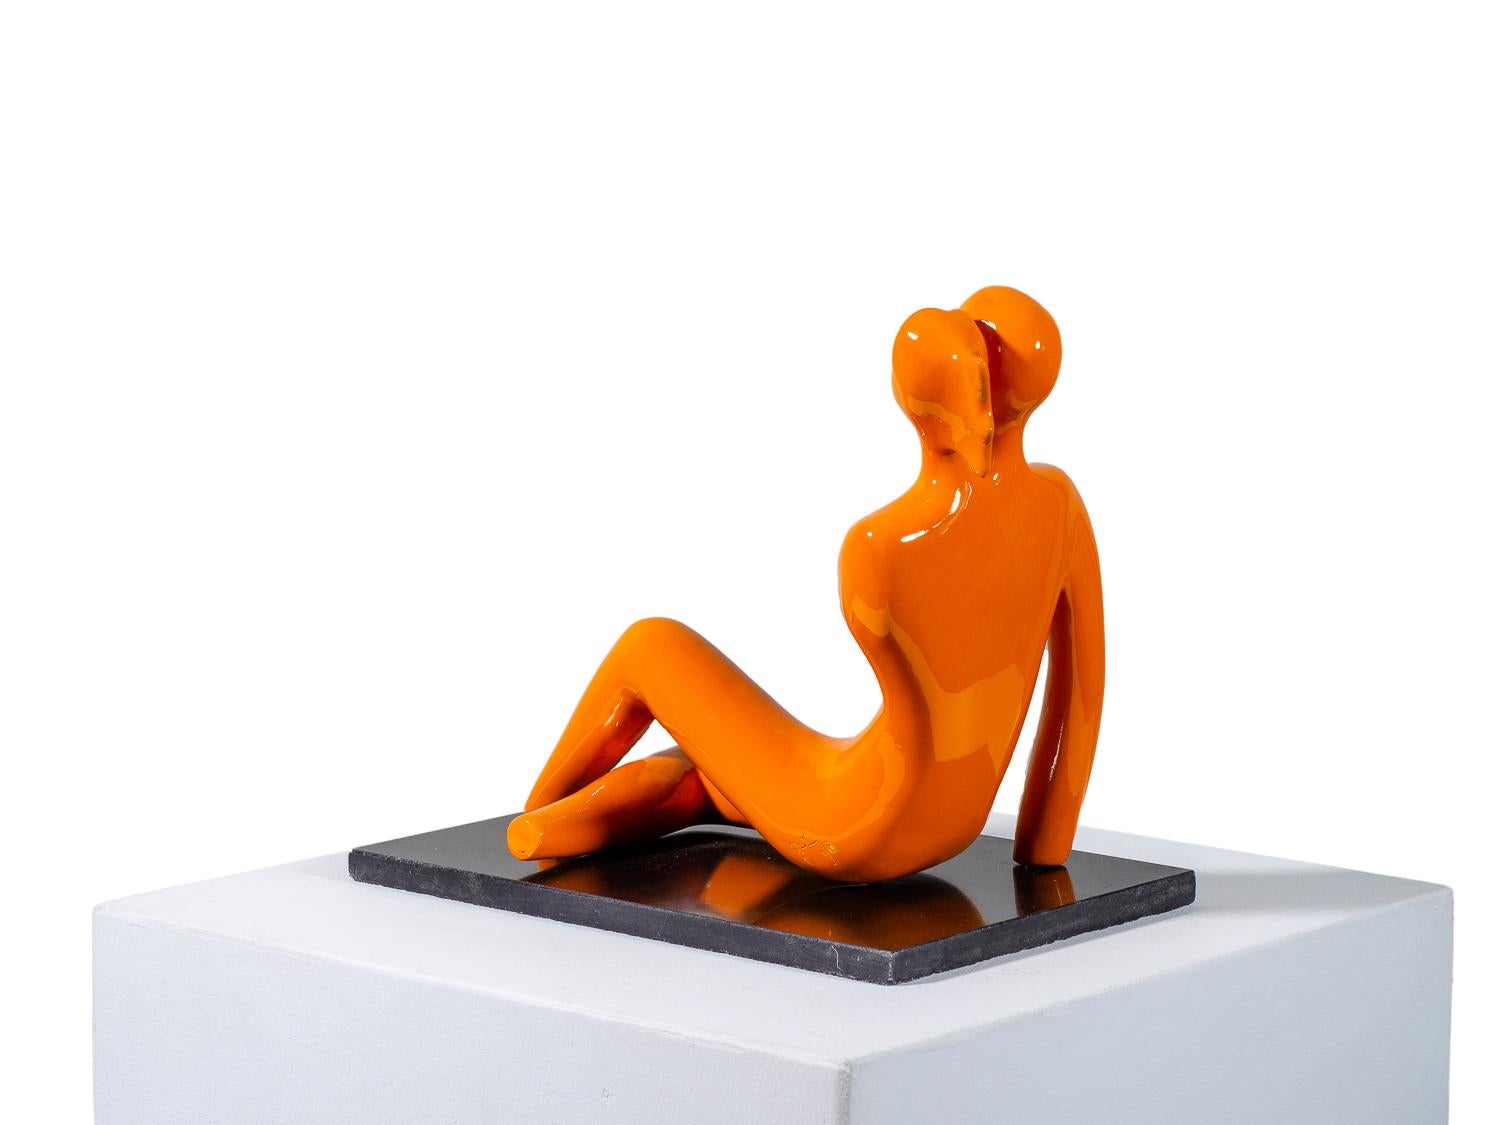 Soul Mates #2 (in orange) When in love their souls and bodies fuse into one. - Gold Figurative Sculpture by Beatriz Gerenstein